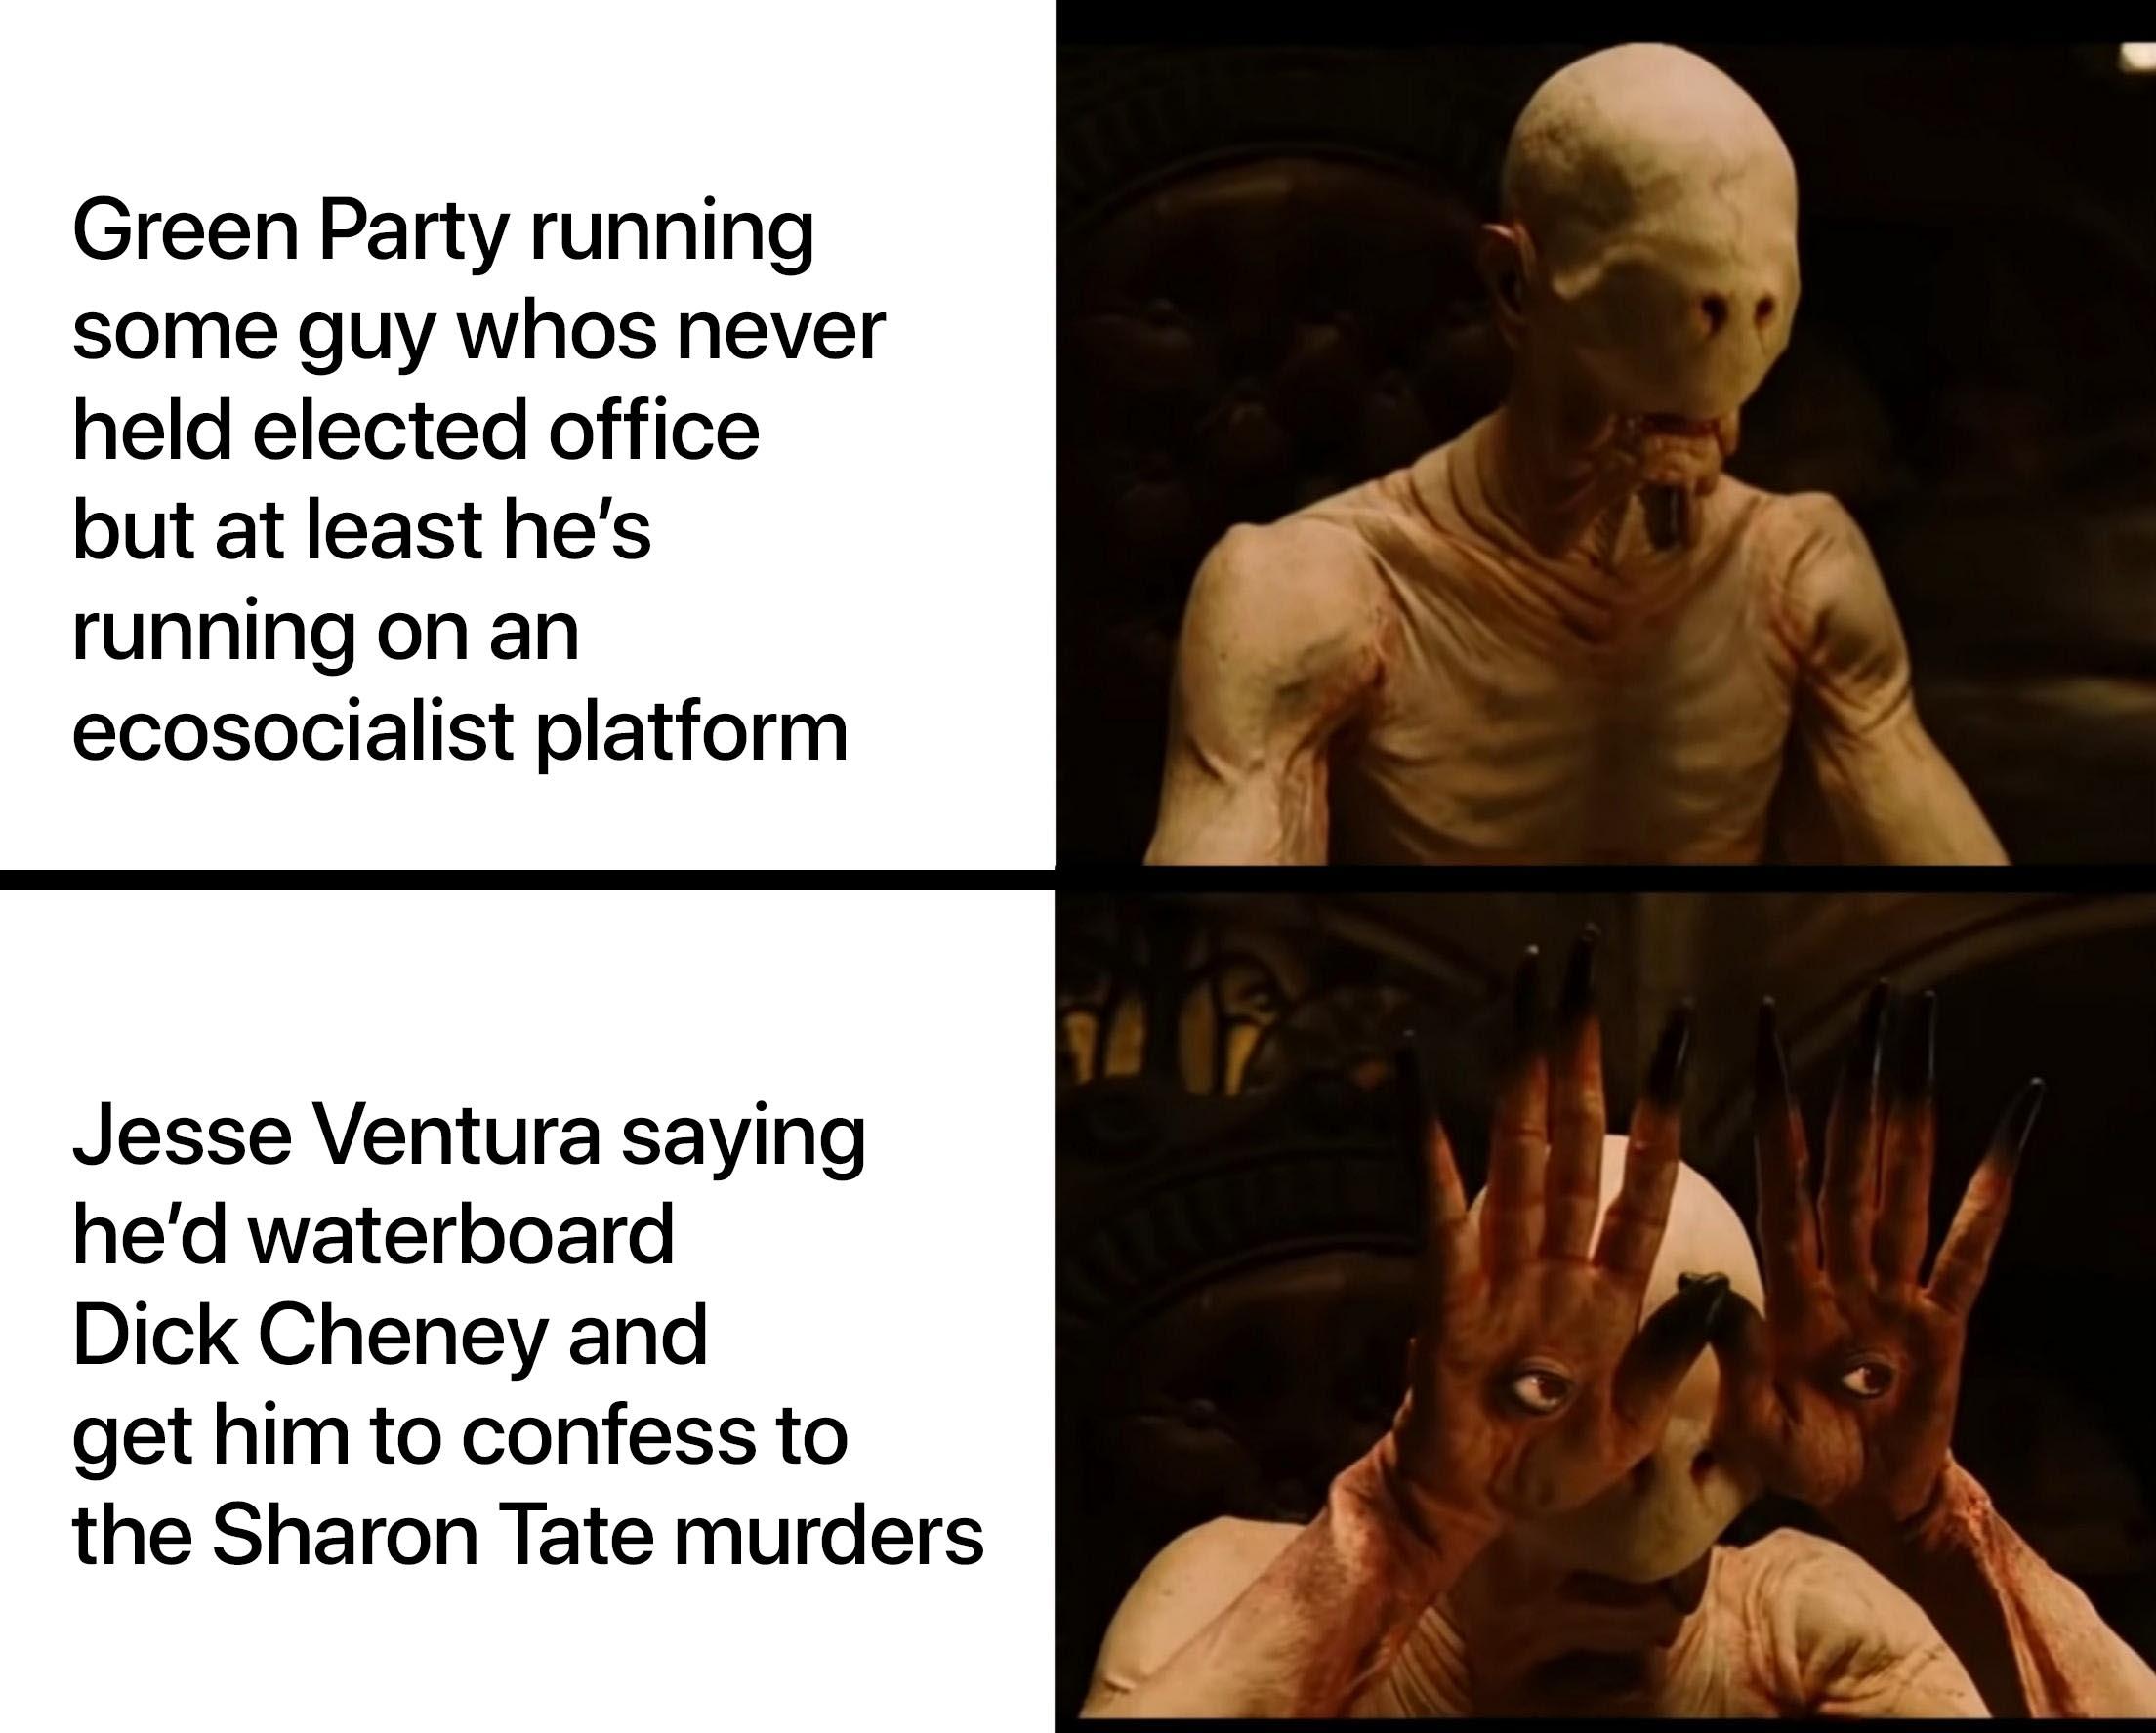 Political, The_Body, Jesse, Howie, Cheney, Chapo Political Memes Political, The_Body, Jesse, Howie, Cheney, Chapo text: Green Party running some guy whos never held elected office but at least he's running on an ecosocialist platform Jesse Ventura saying he'd waterboard Dick Cheney and get him to confess to the Sharon Tate murders 